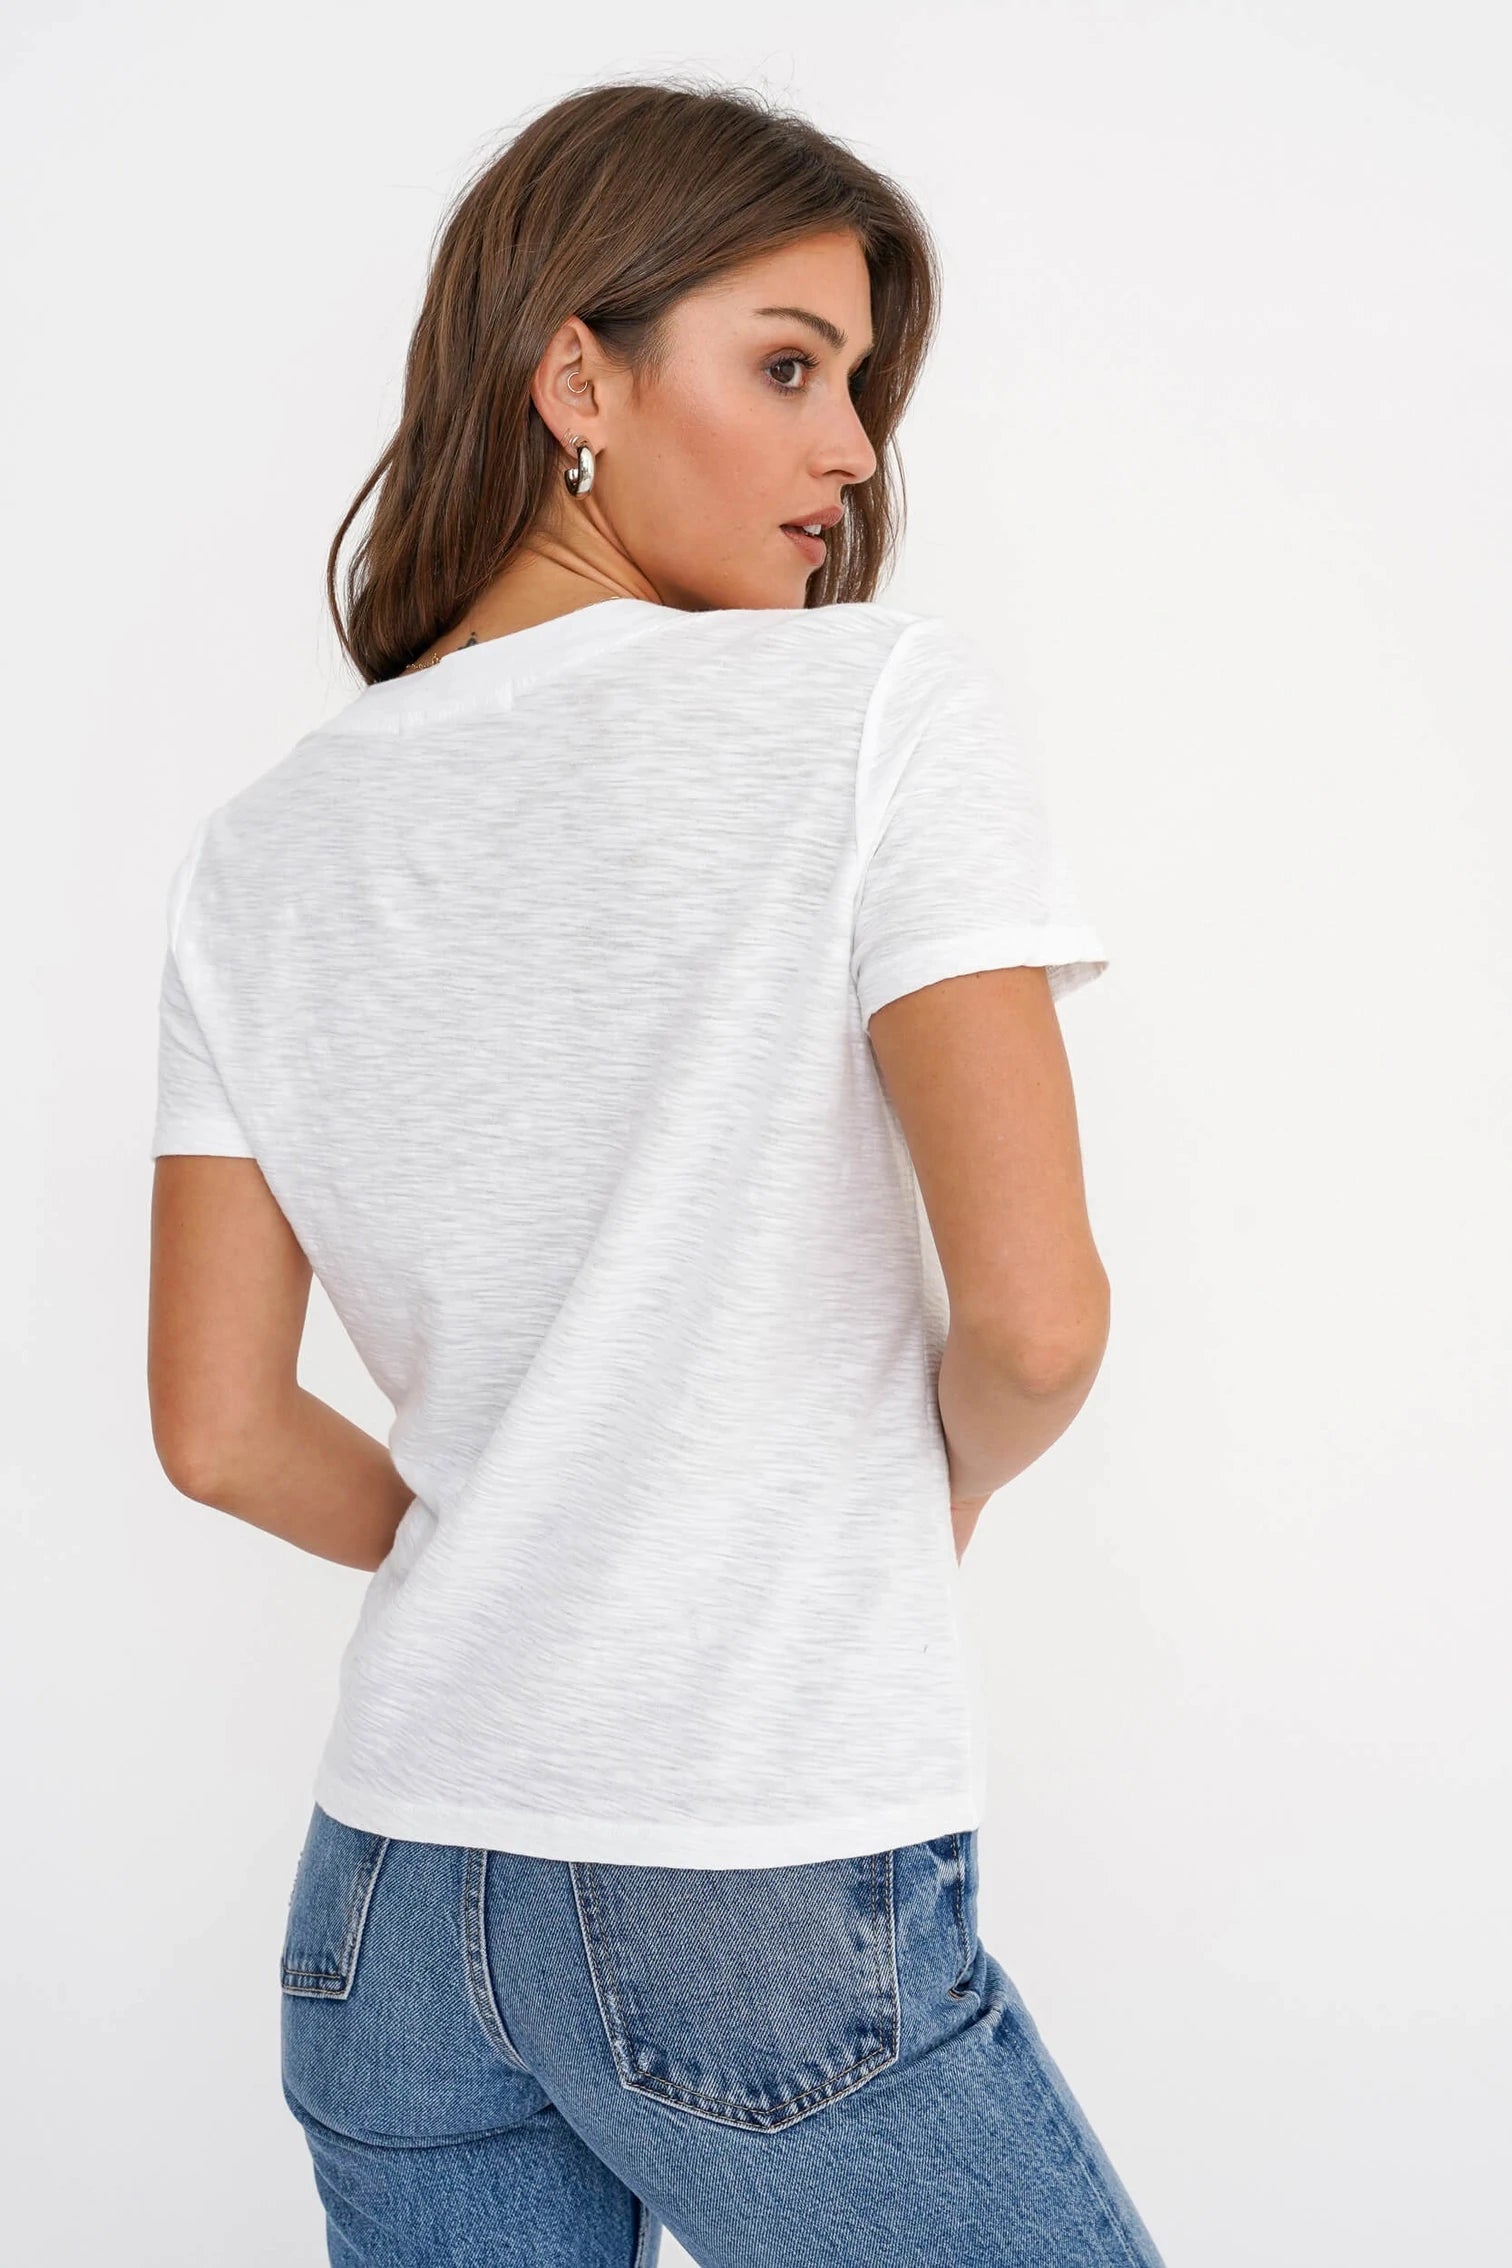 Plata Notched Tee